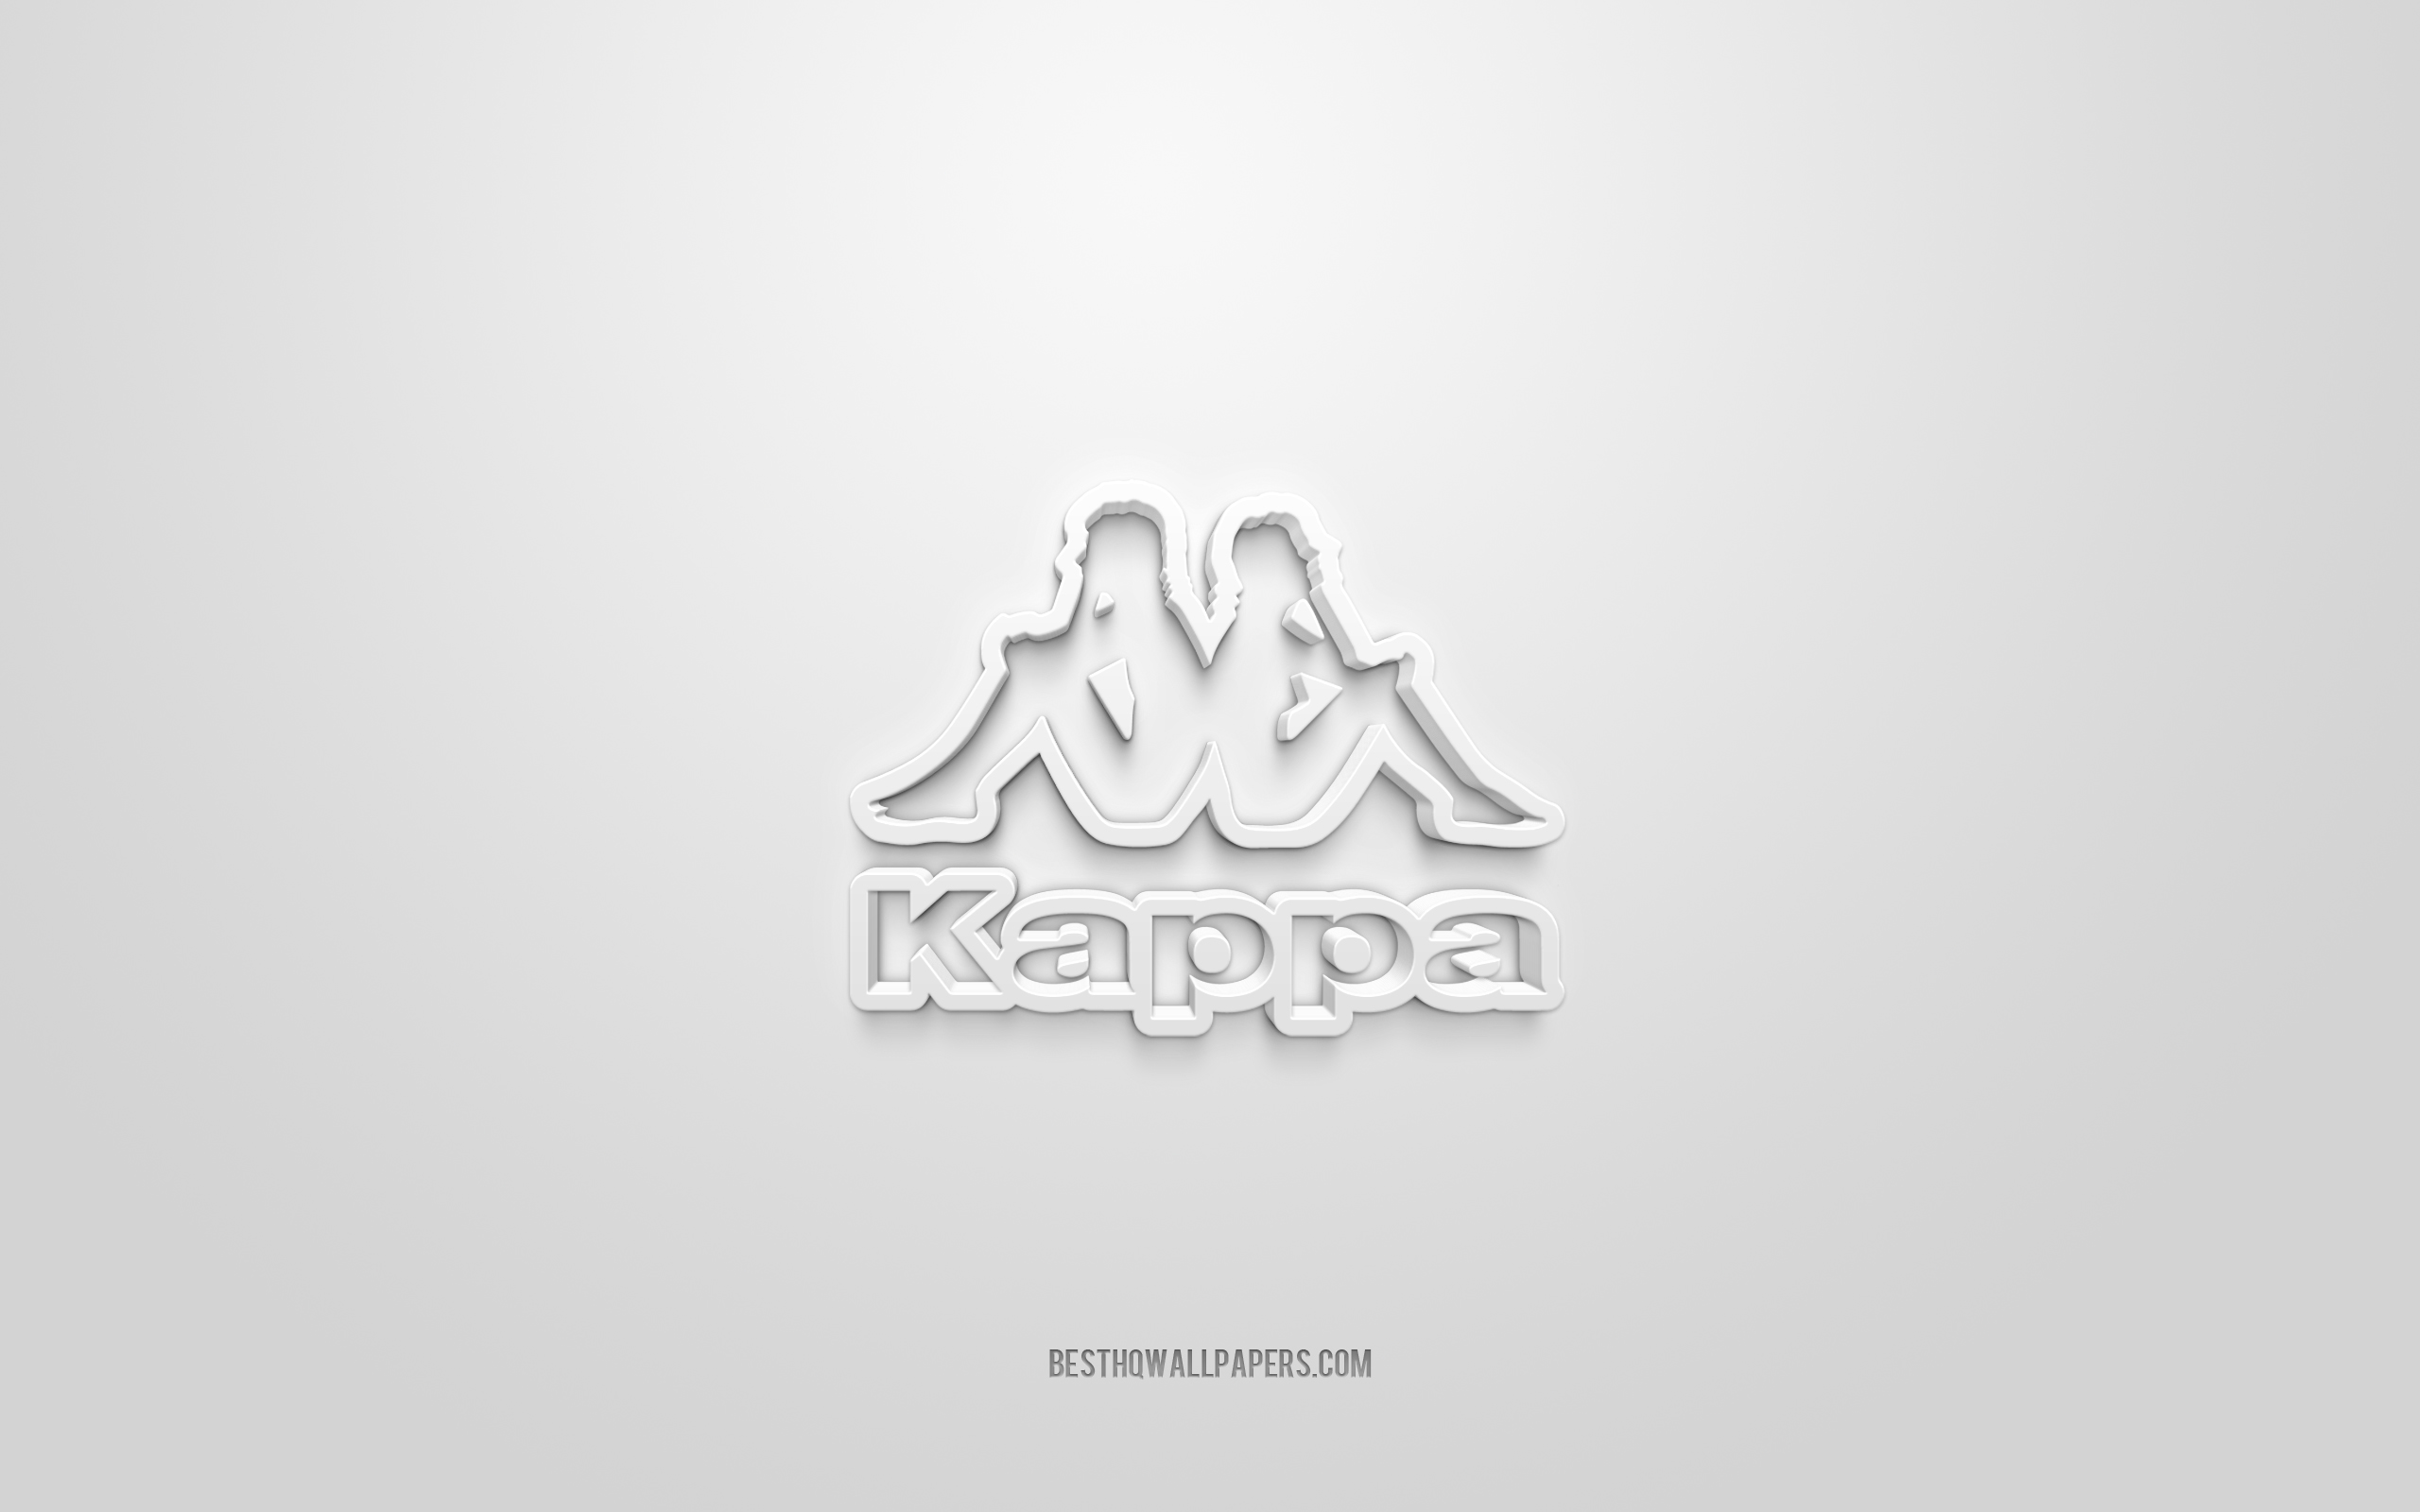 Download wallpapers Kappa logo, white background, Kappa logo, 3d art, Kappa, brands logo, Kappalogo, white 3d Kappa logo for desktop resolution High Quality pictures wallpapers